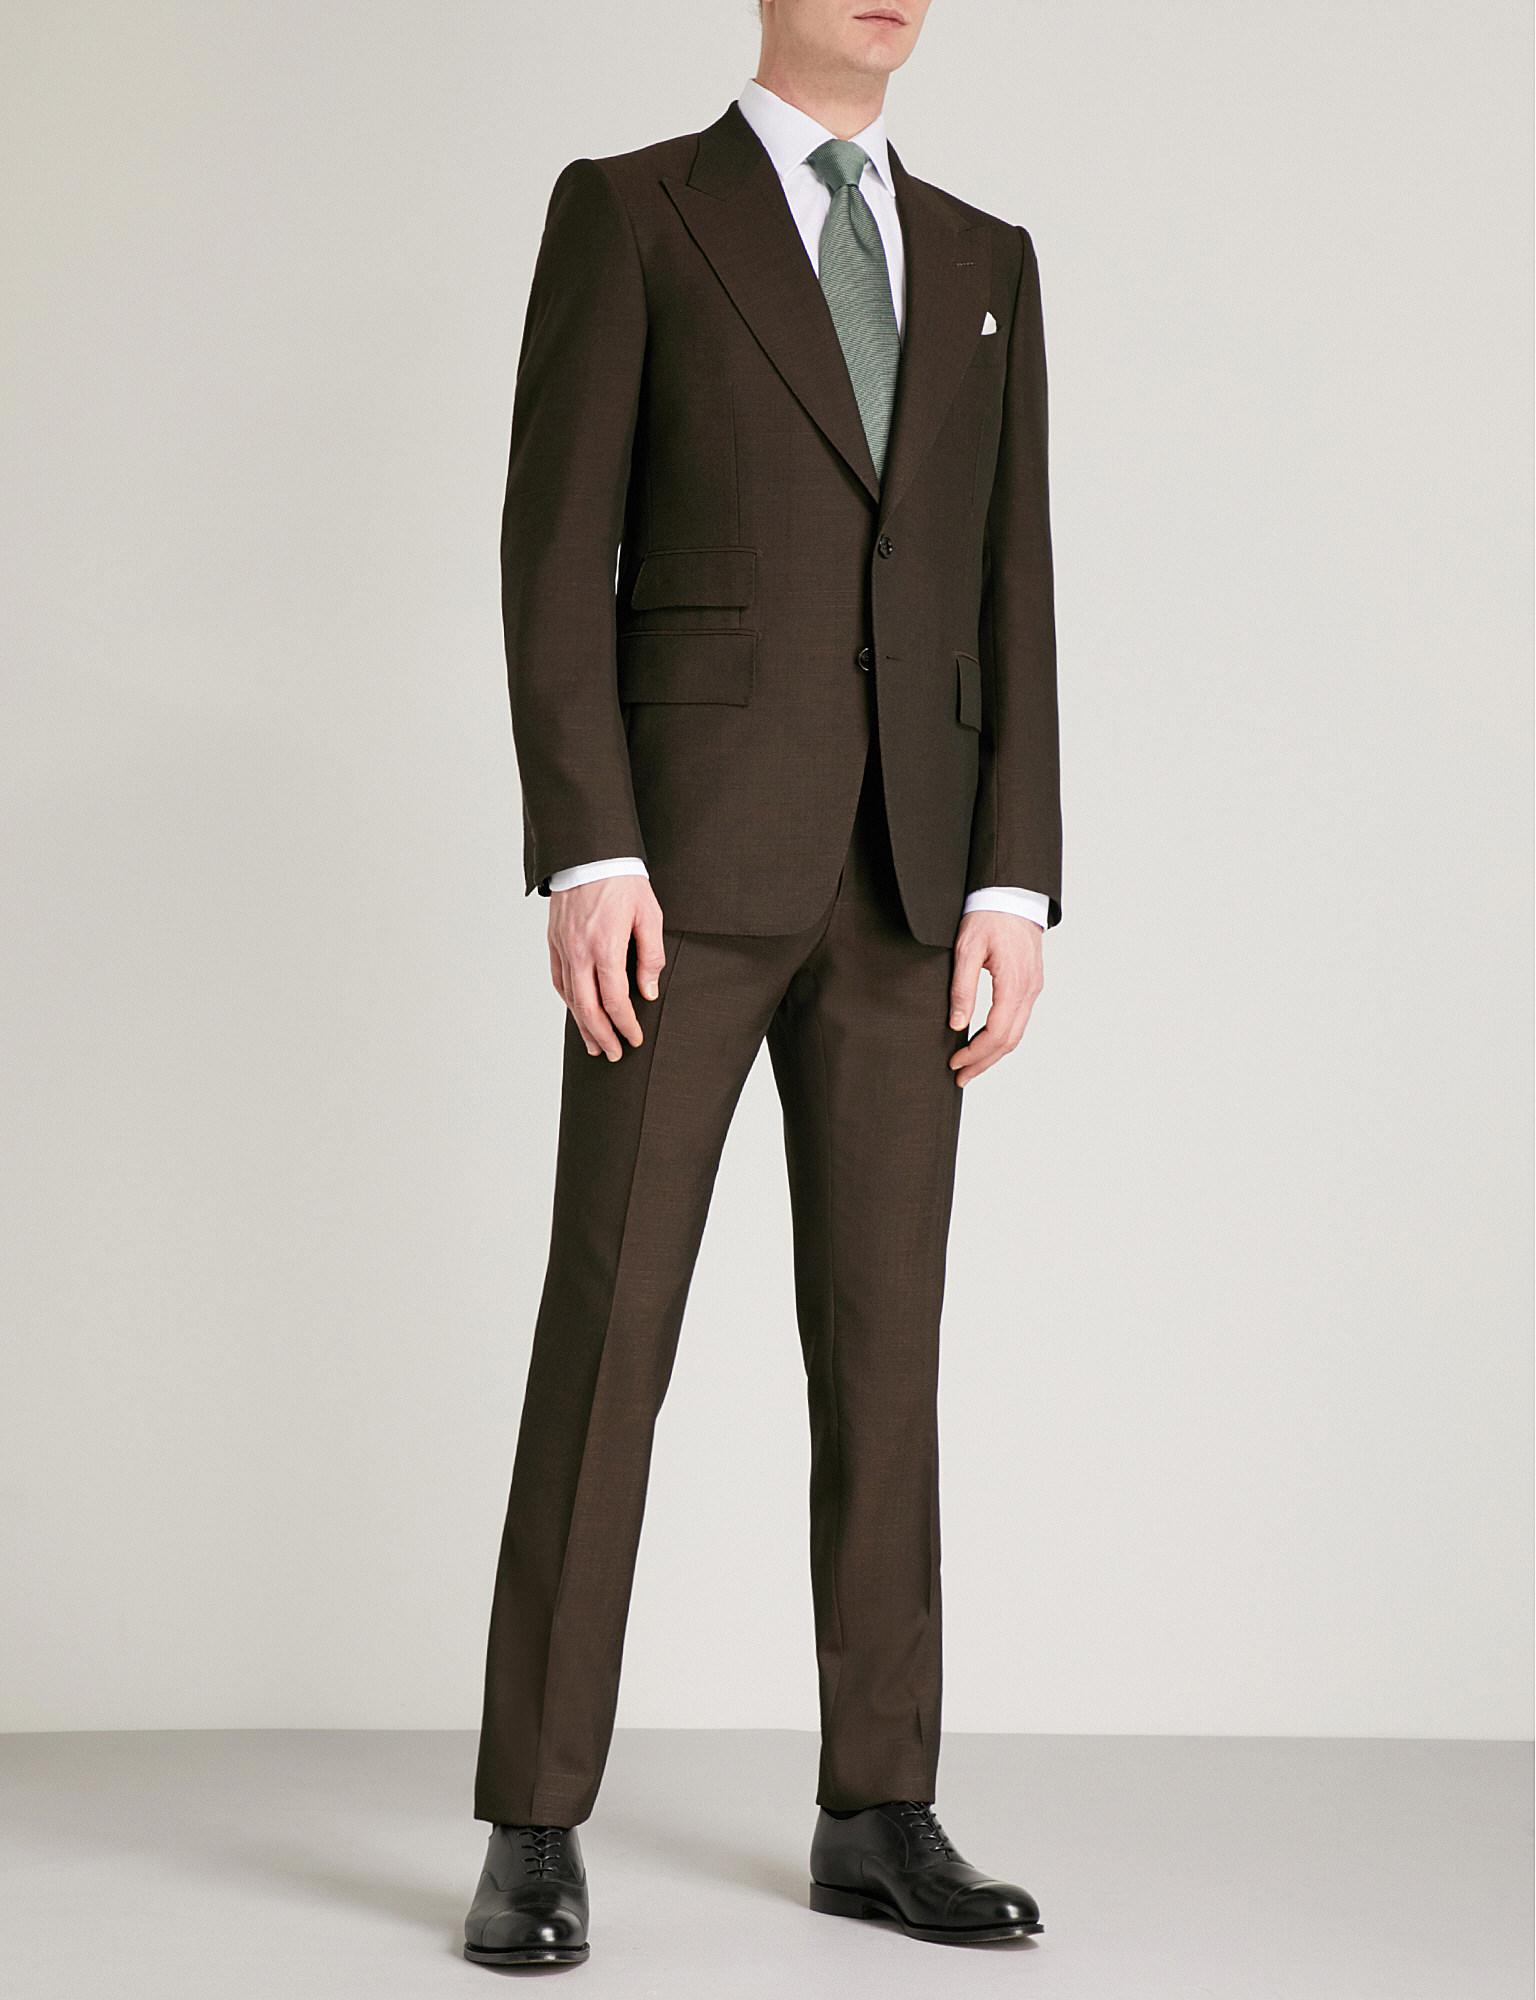 Tom Ford Wool Shelton-fit Woven Suit in Brown for Men - Lyst